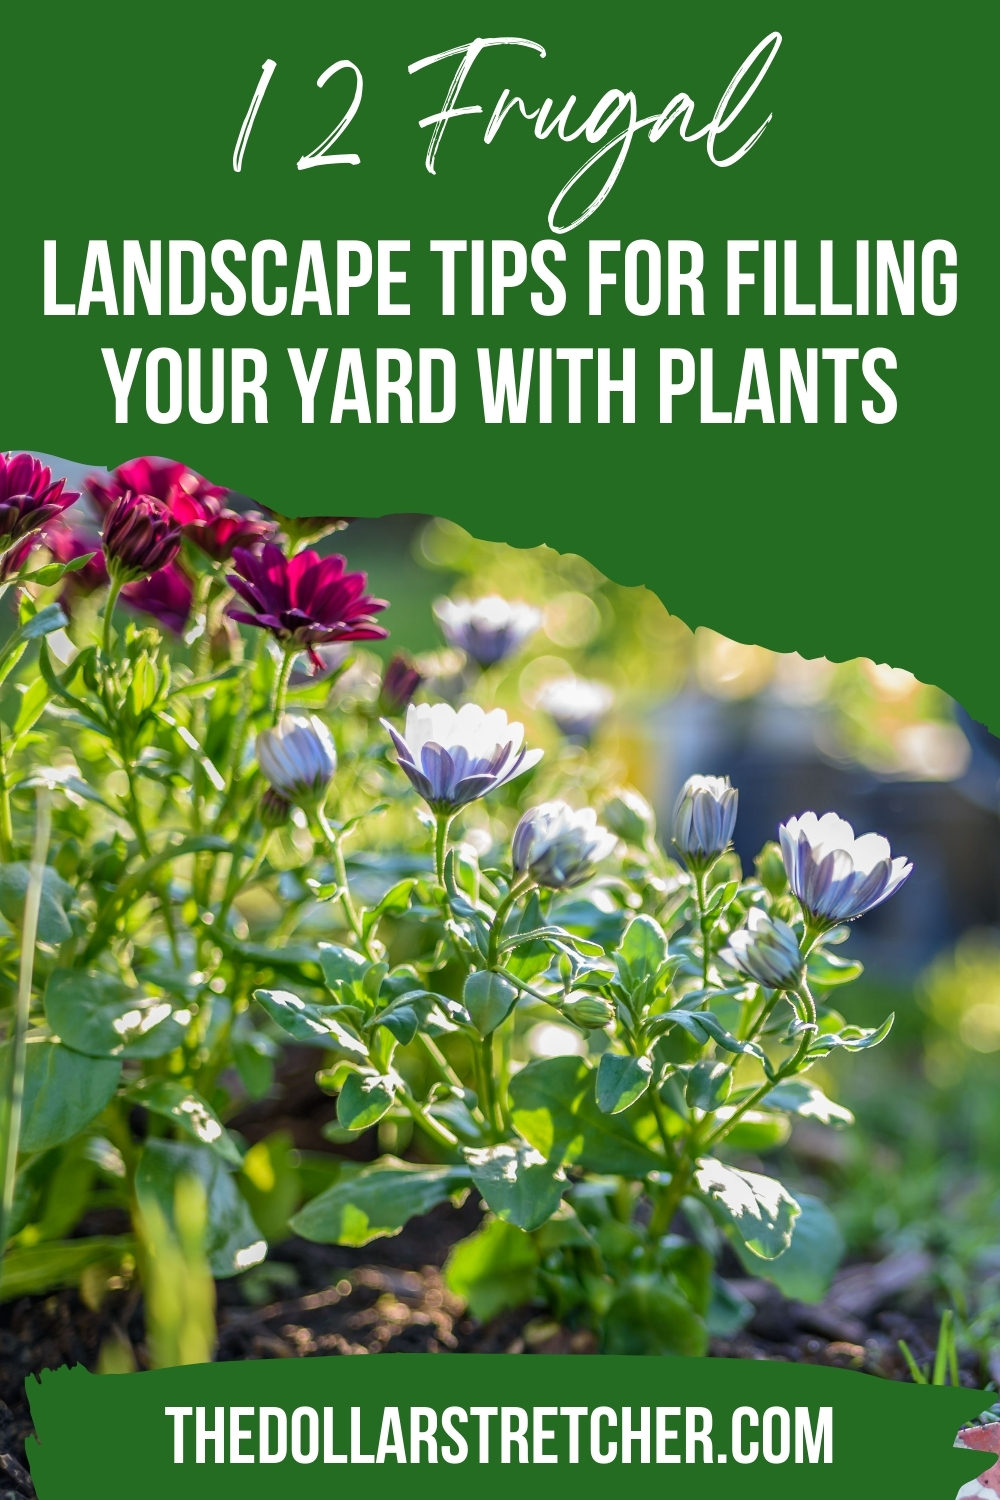 Landscape Tips for Filling Yard With Plants PIN